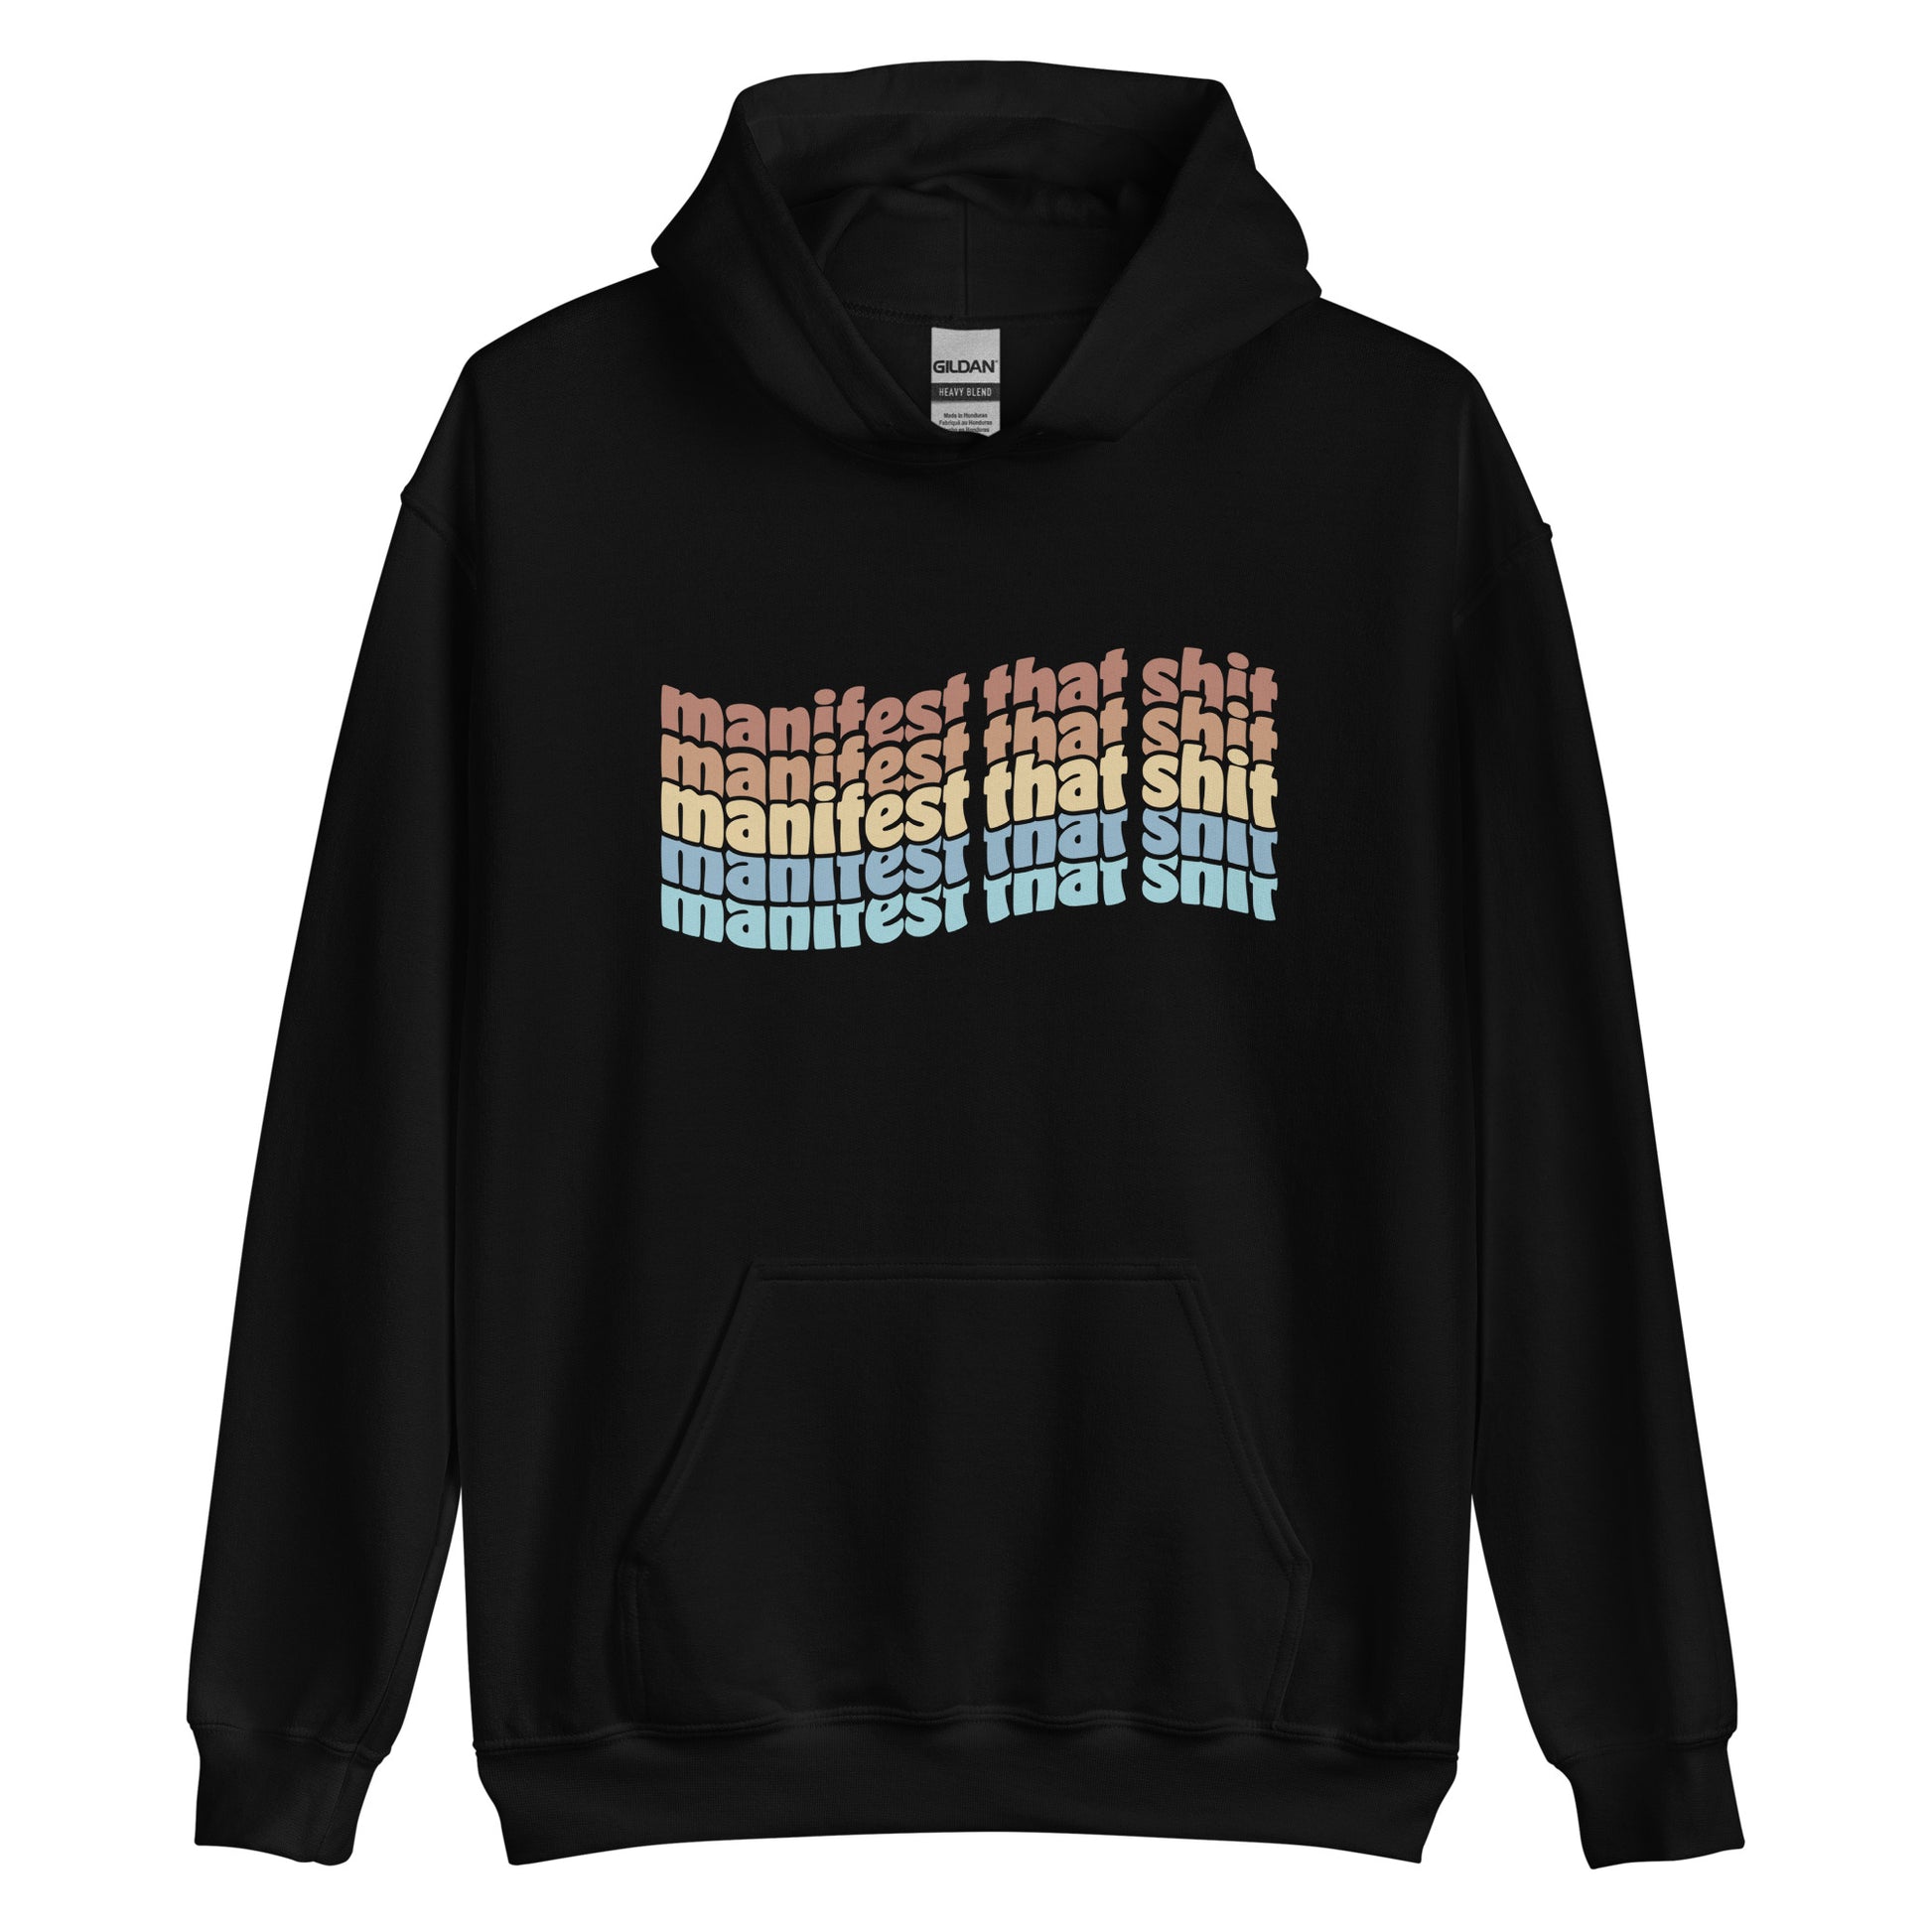 A black hooded sweatshirt featuring stacked text that reads "manifest that shit" in a rainbow of colors.